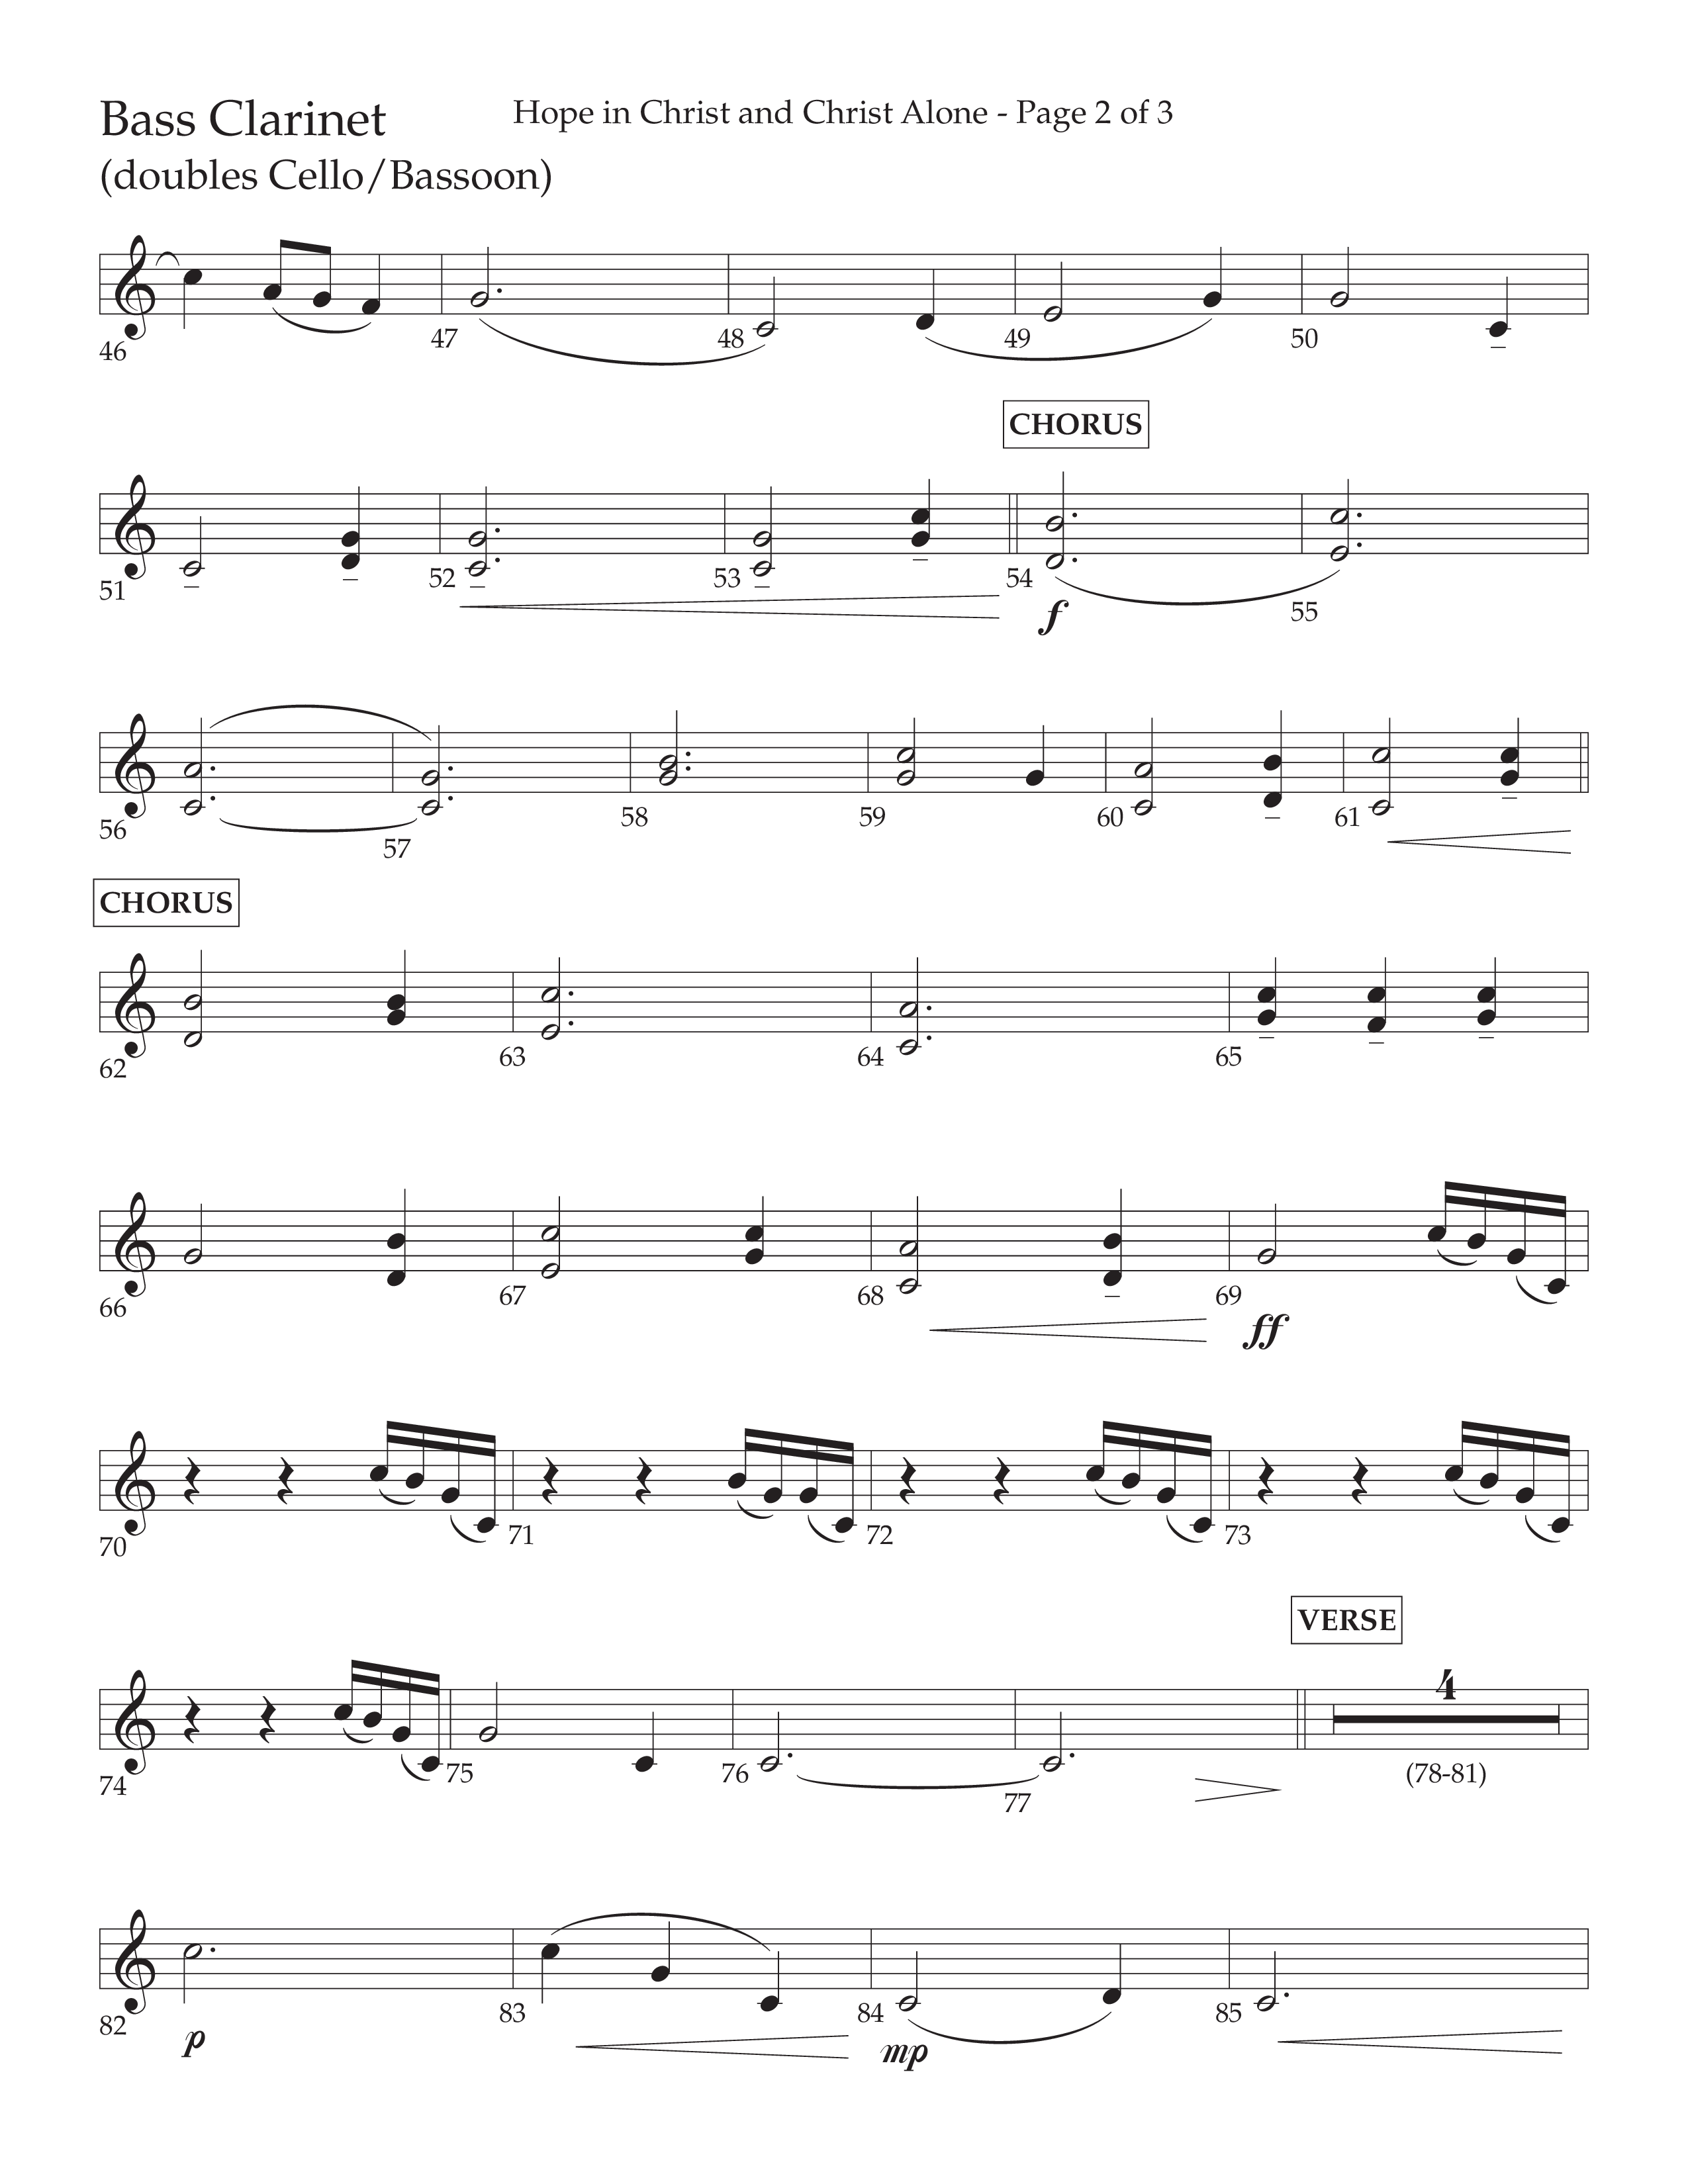 Hope In Christ And Christ Alone (Choral Anthem SATB) Bass Clarinet (Lifeway Choral / Arr. Cliff Duren)